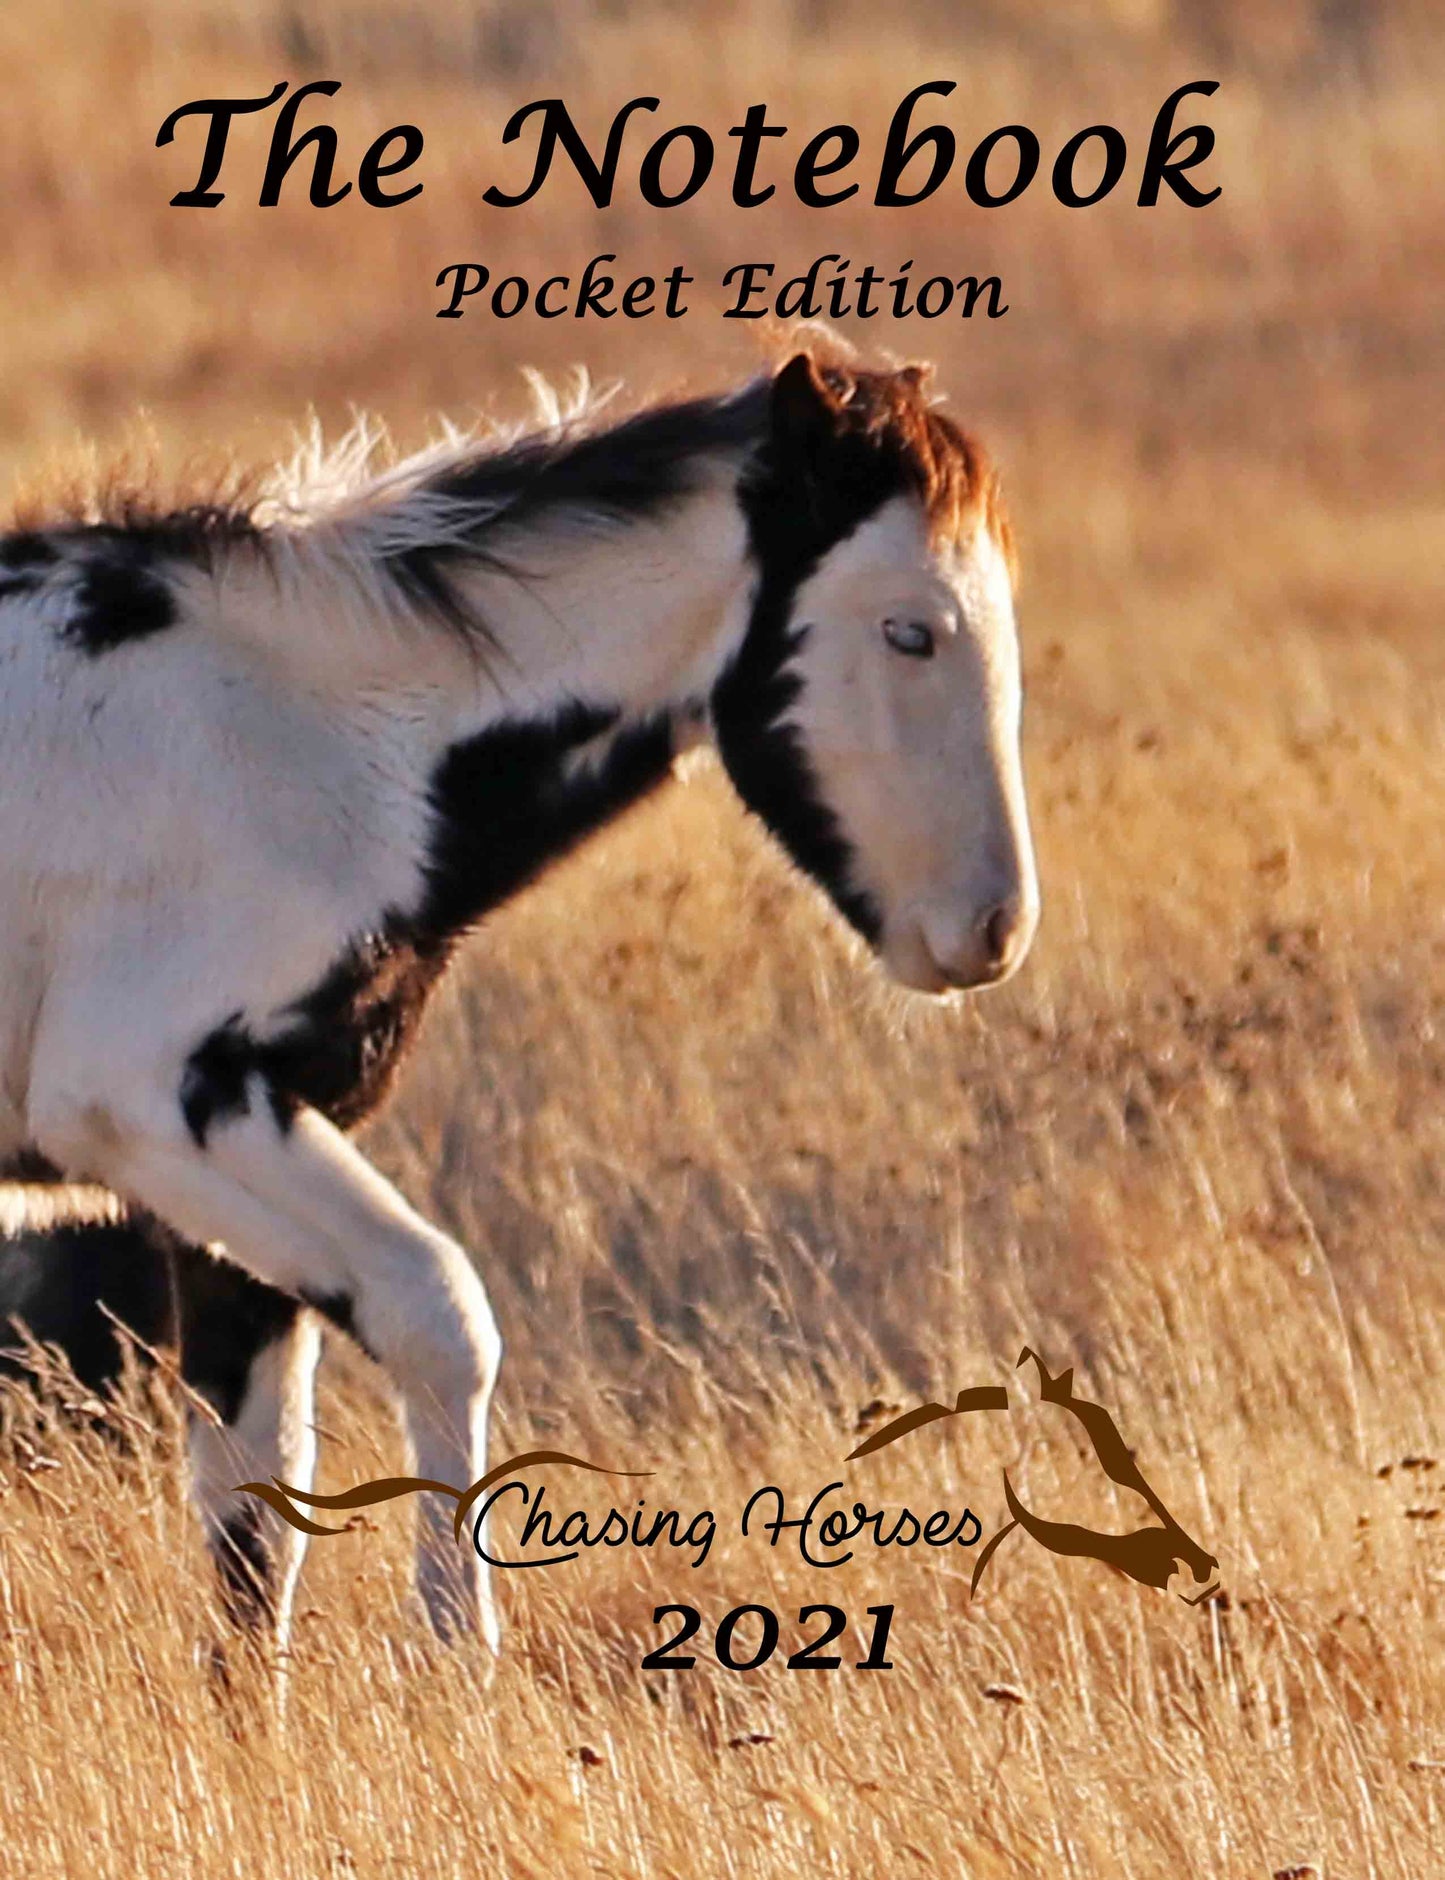 Chasing Horses 2021 The Notebook - pocket version